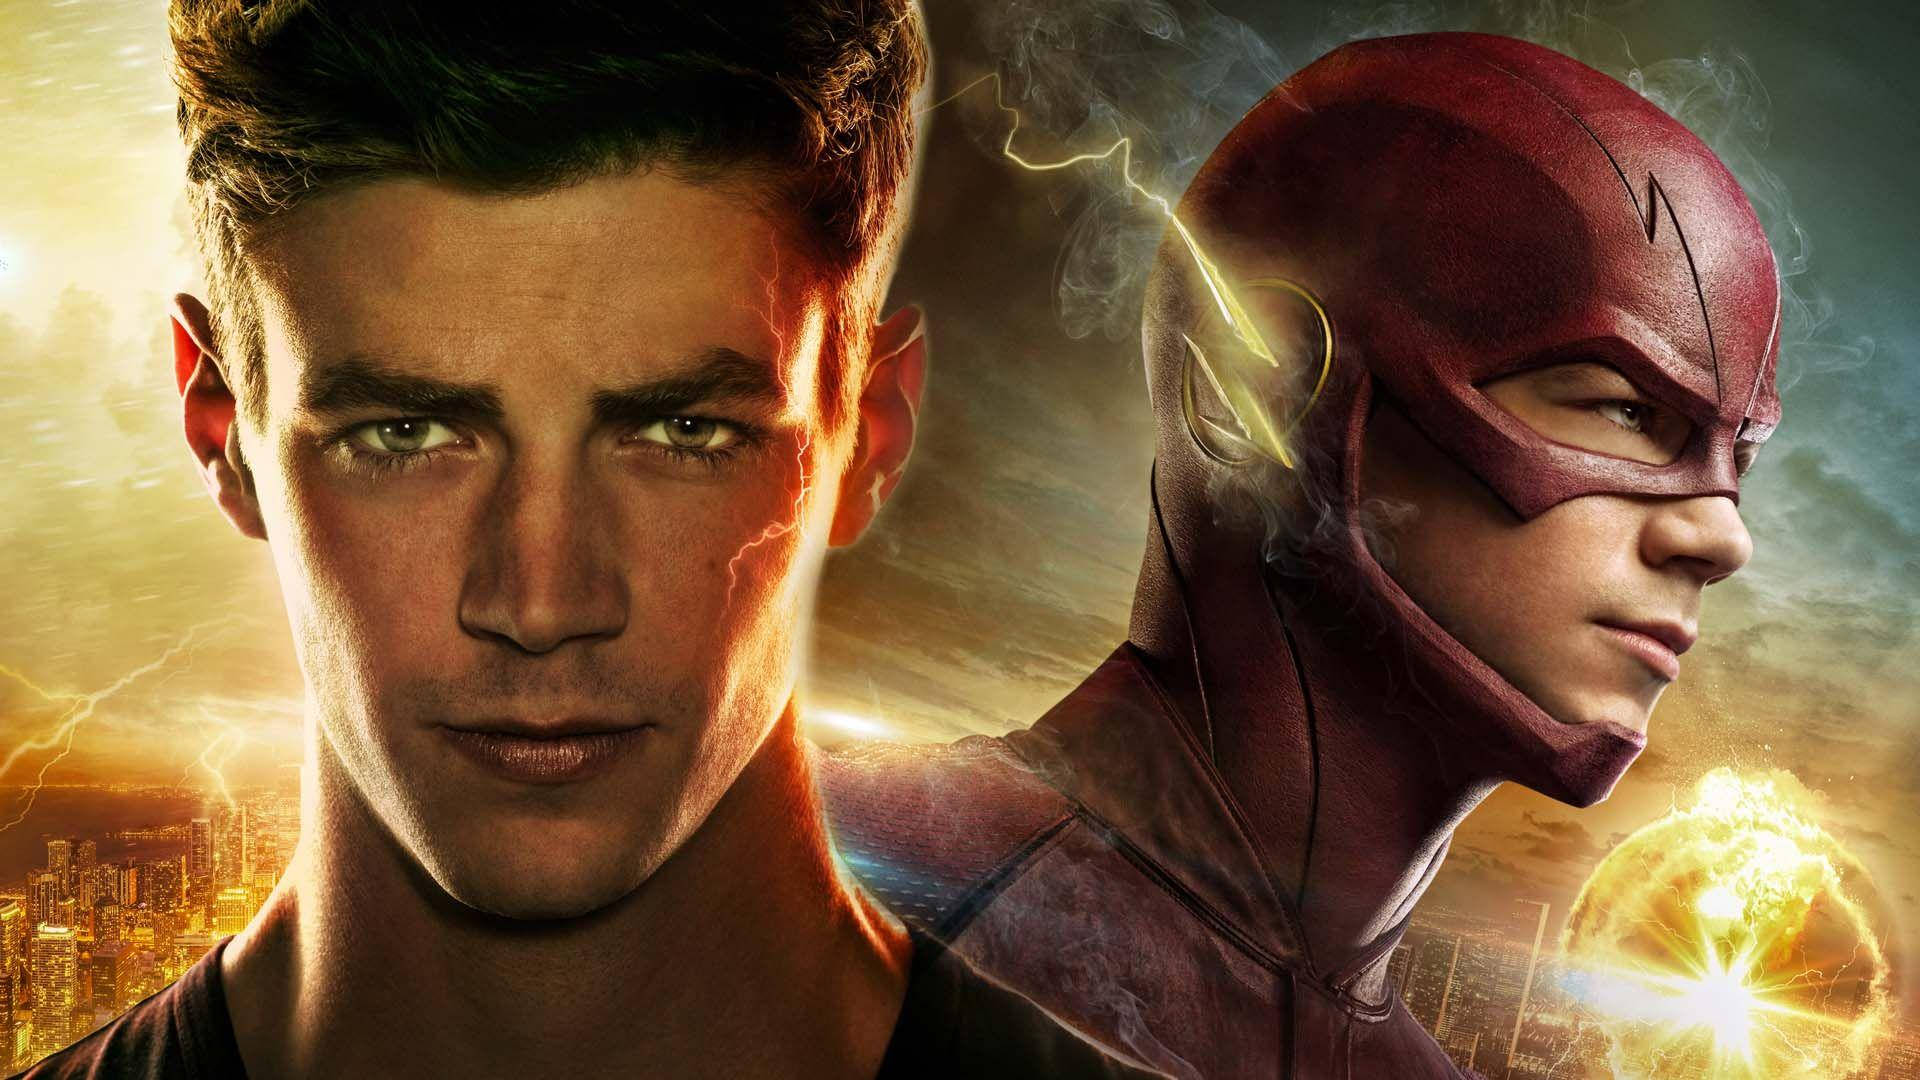 Grant Gustin The Flash Collage Poster Background